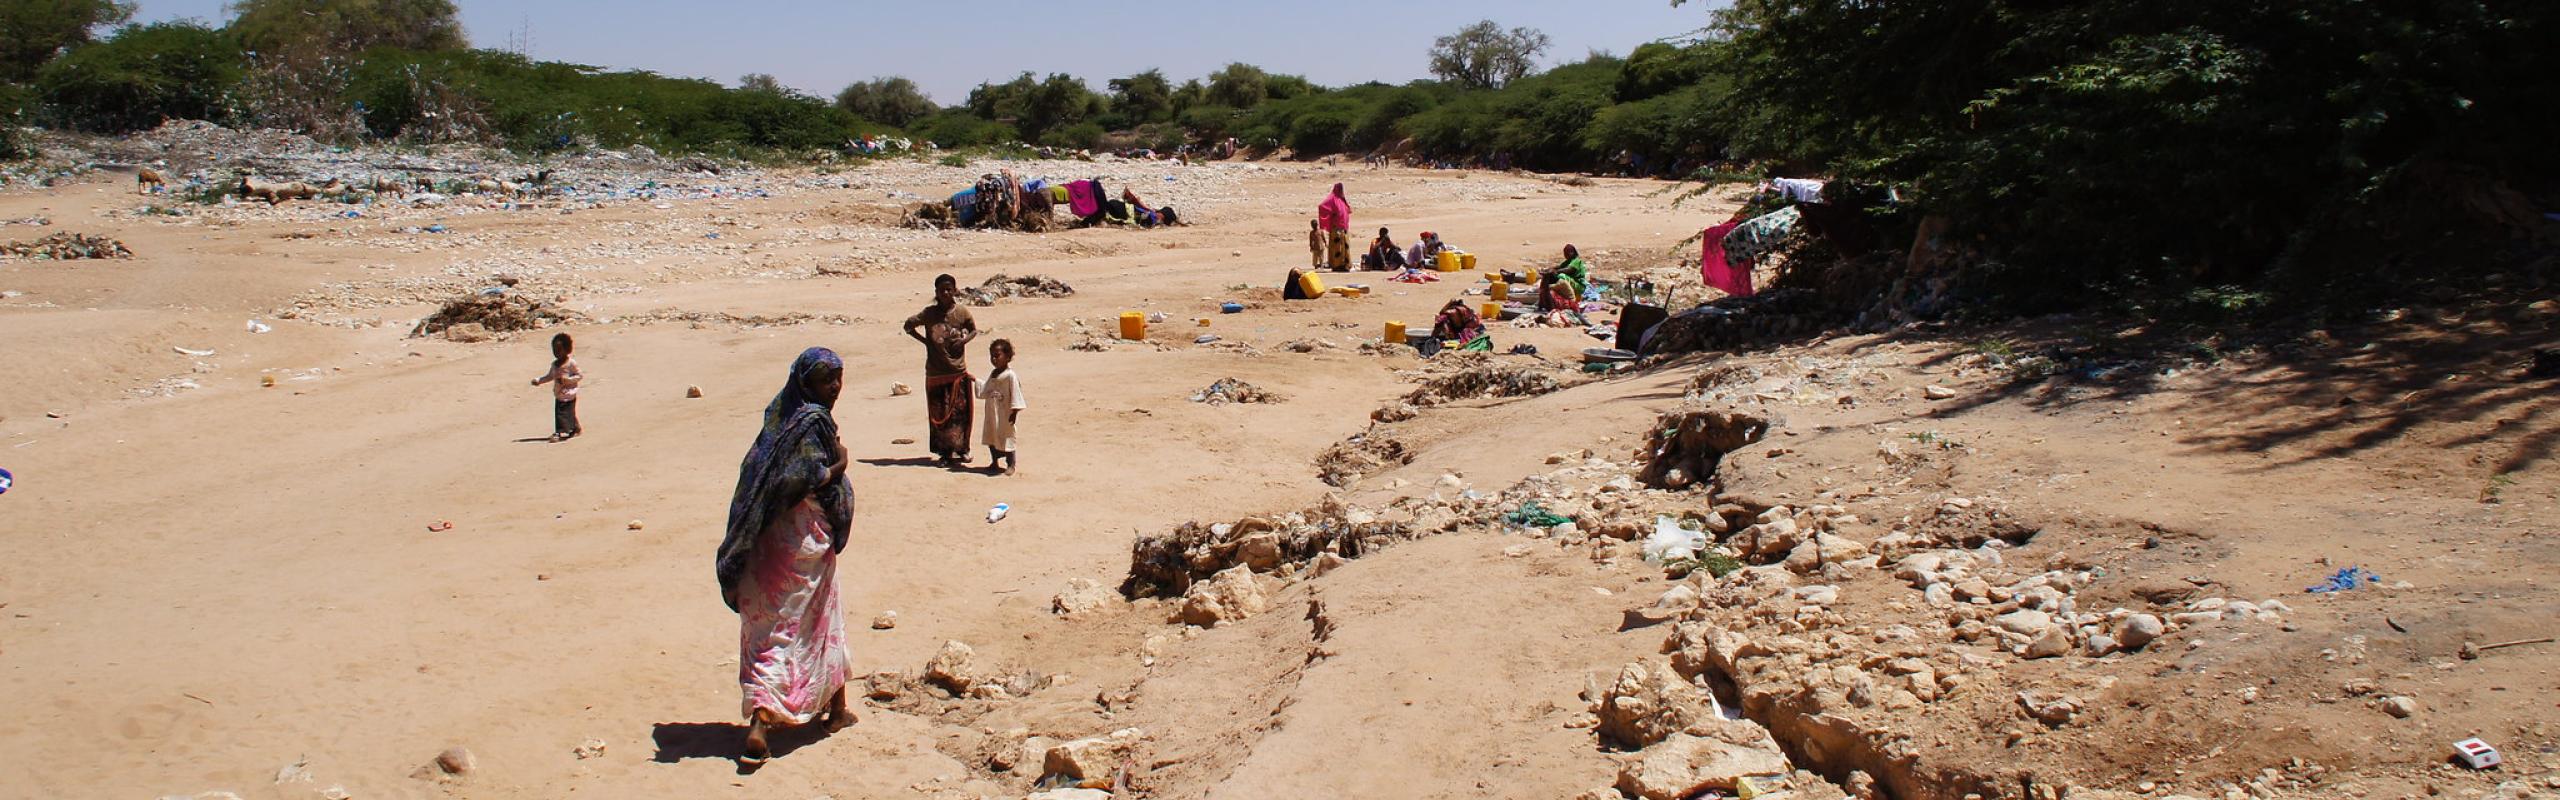 Famine and drought in Somalia